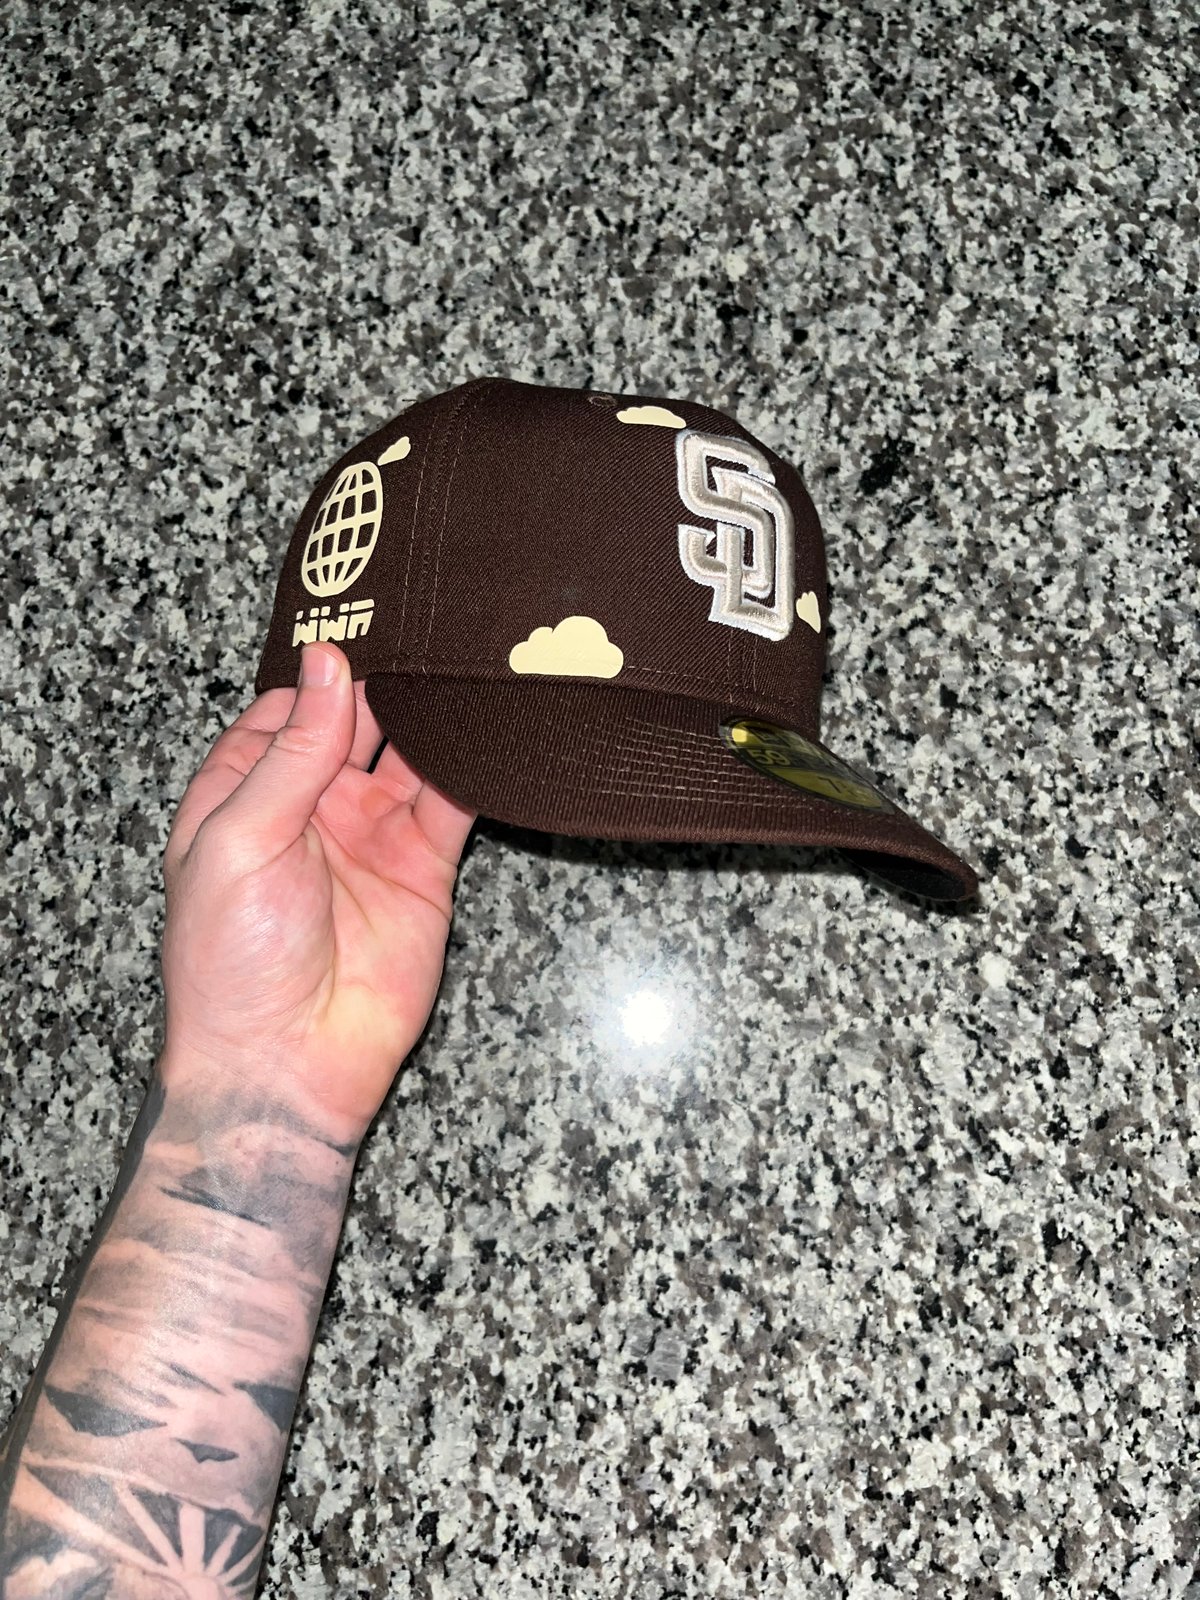 New Era San Diego Padres 9FIFTY Keep It Clean Snapback Hat - Neon